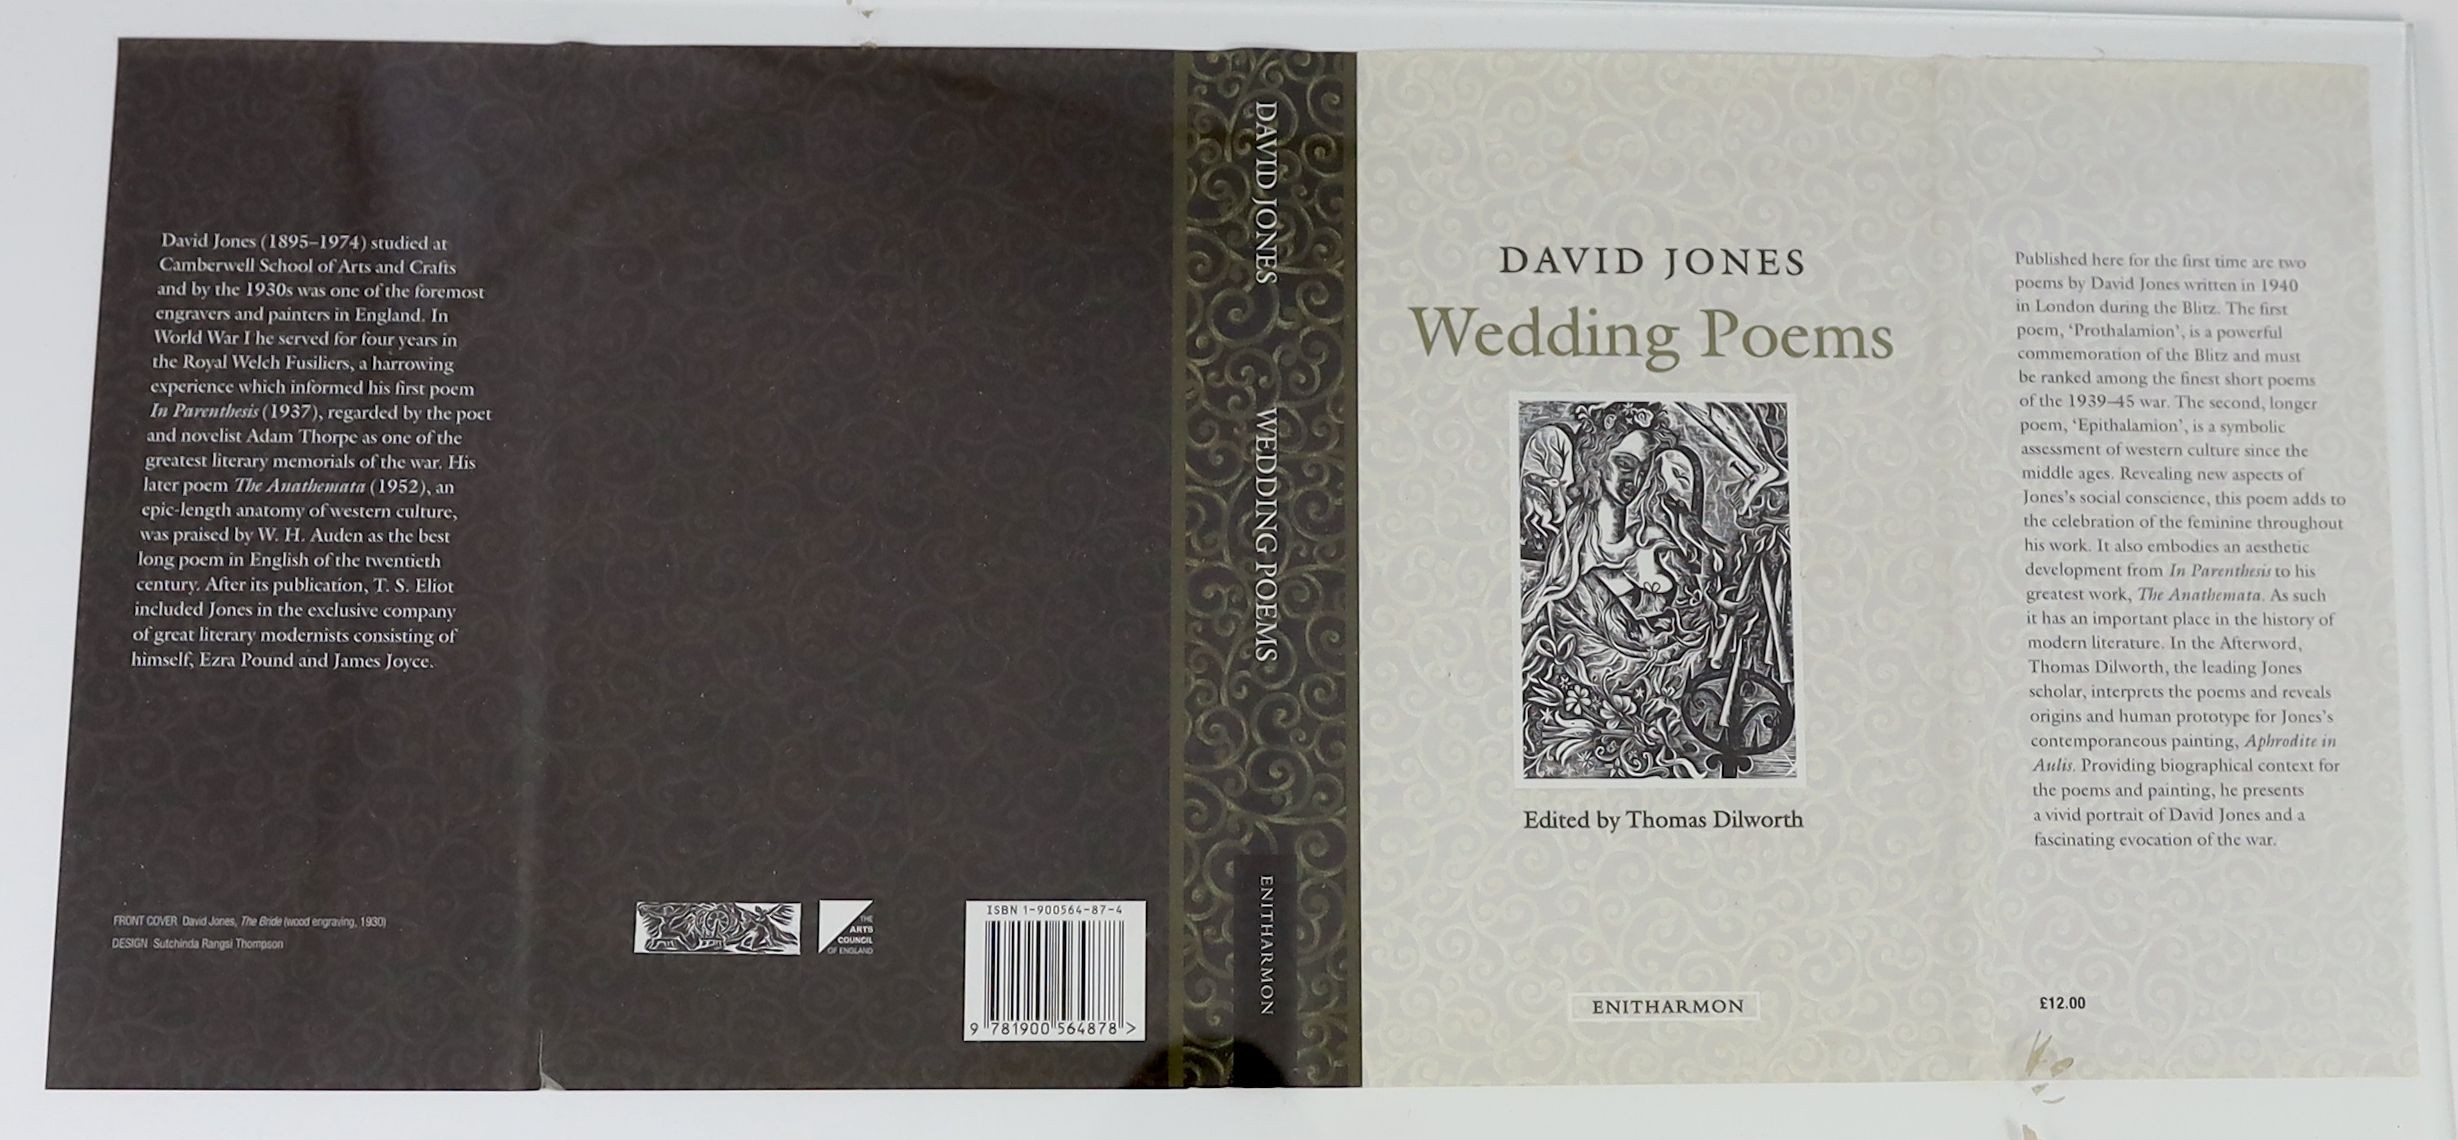 Jones, David - Wedding Poems. 1st ed. complete with numerous text illustrations. Publishers cloth with gilt letters direct on spine and original decorative d/j. 8vo. Enitharmon Press, London, 2002; Jones, David [and] Hyn